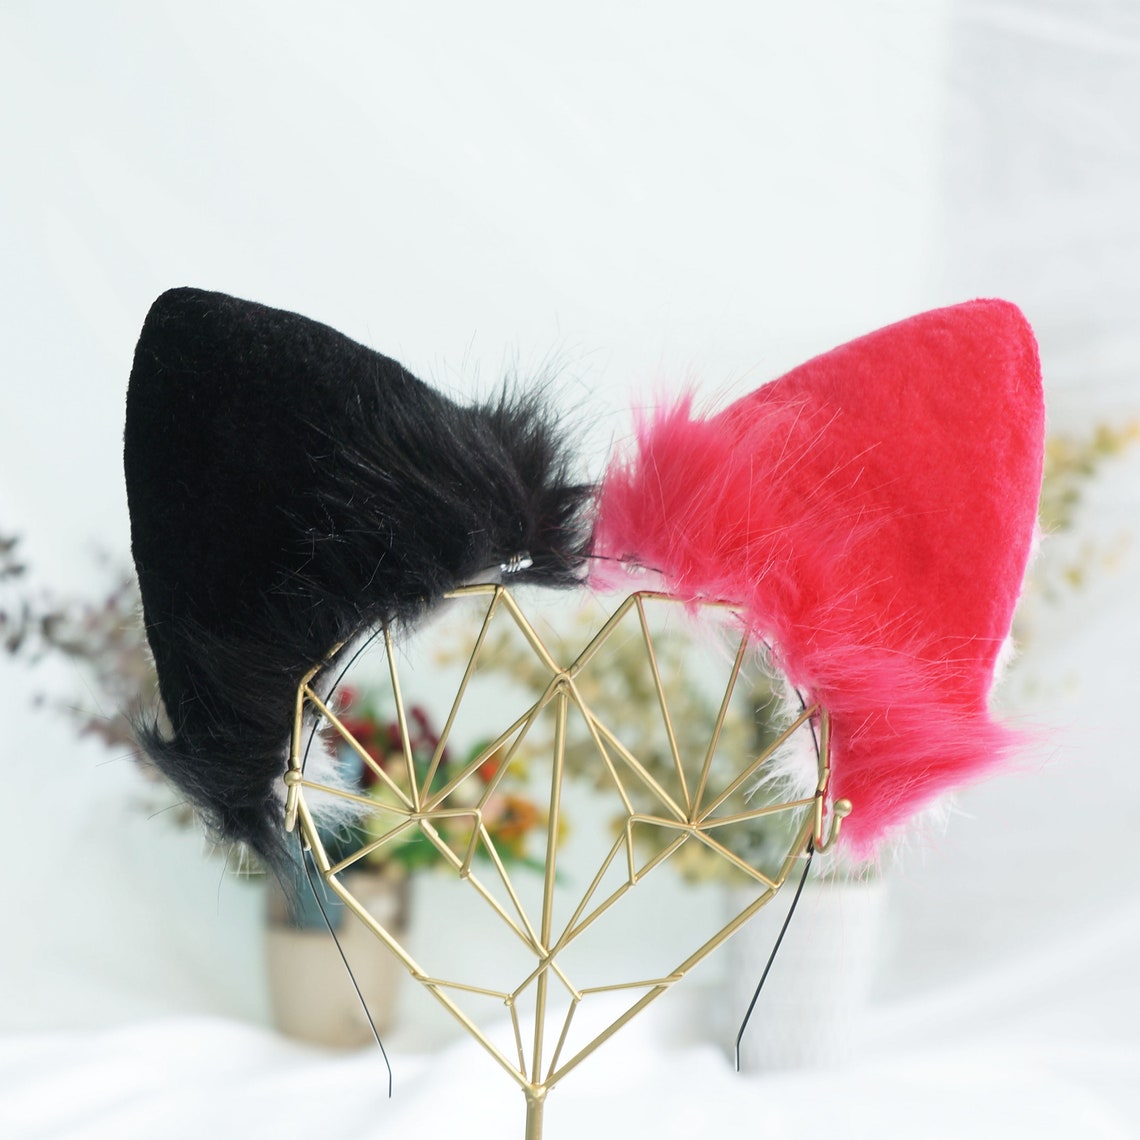 Pink and Black Cat Ears Cat Ears Cosplay Pet Play Tubbo - Etsy